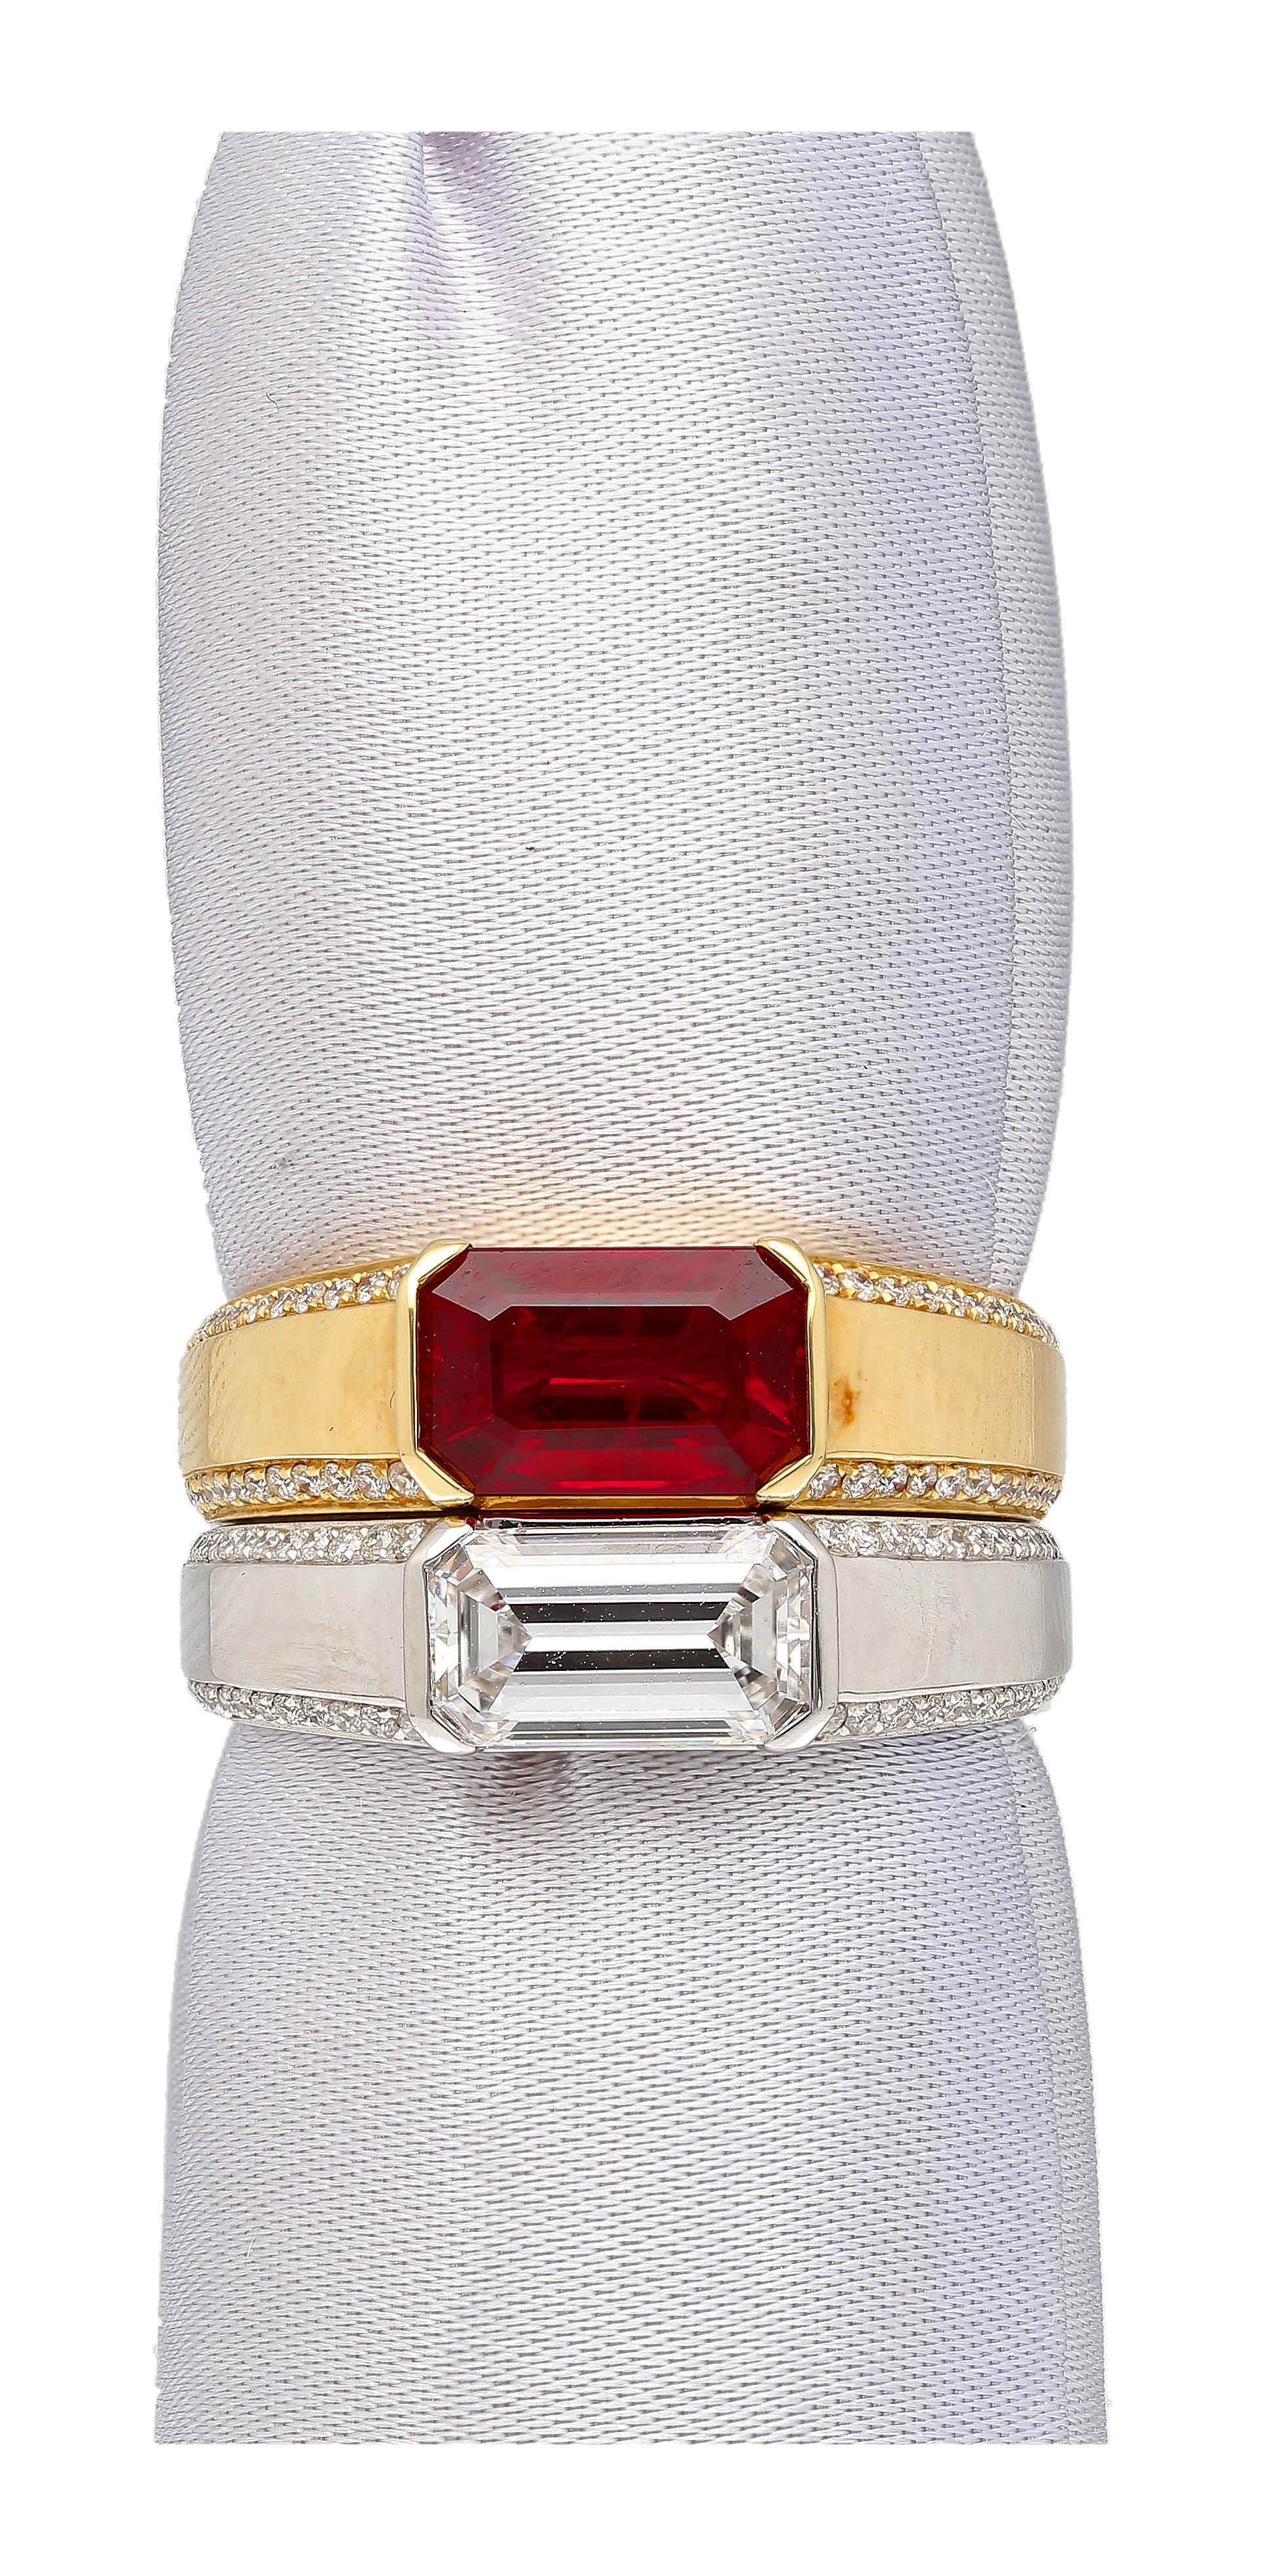 2.09 Carat Vivid Red Pigeon's Blood Burma Ruby Emerald Cut East-West Ring For Sale 2